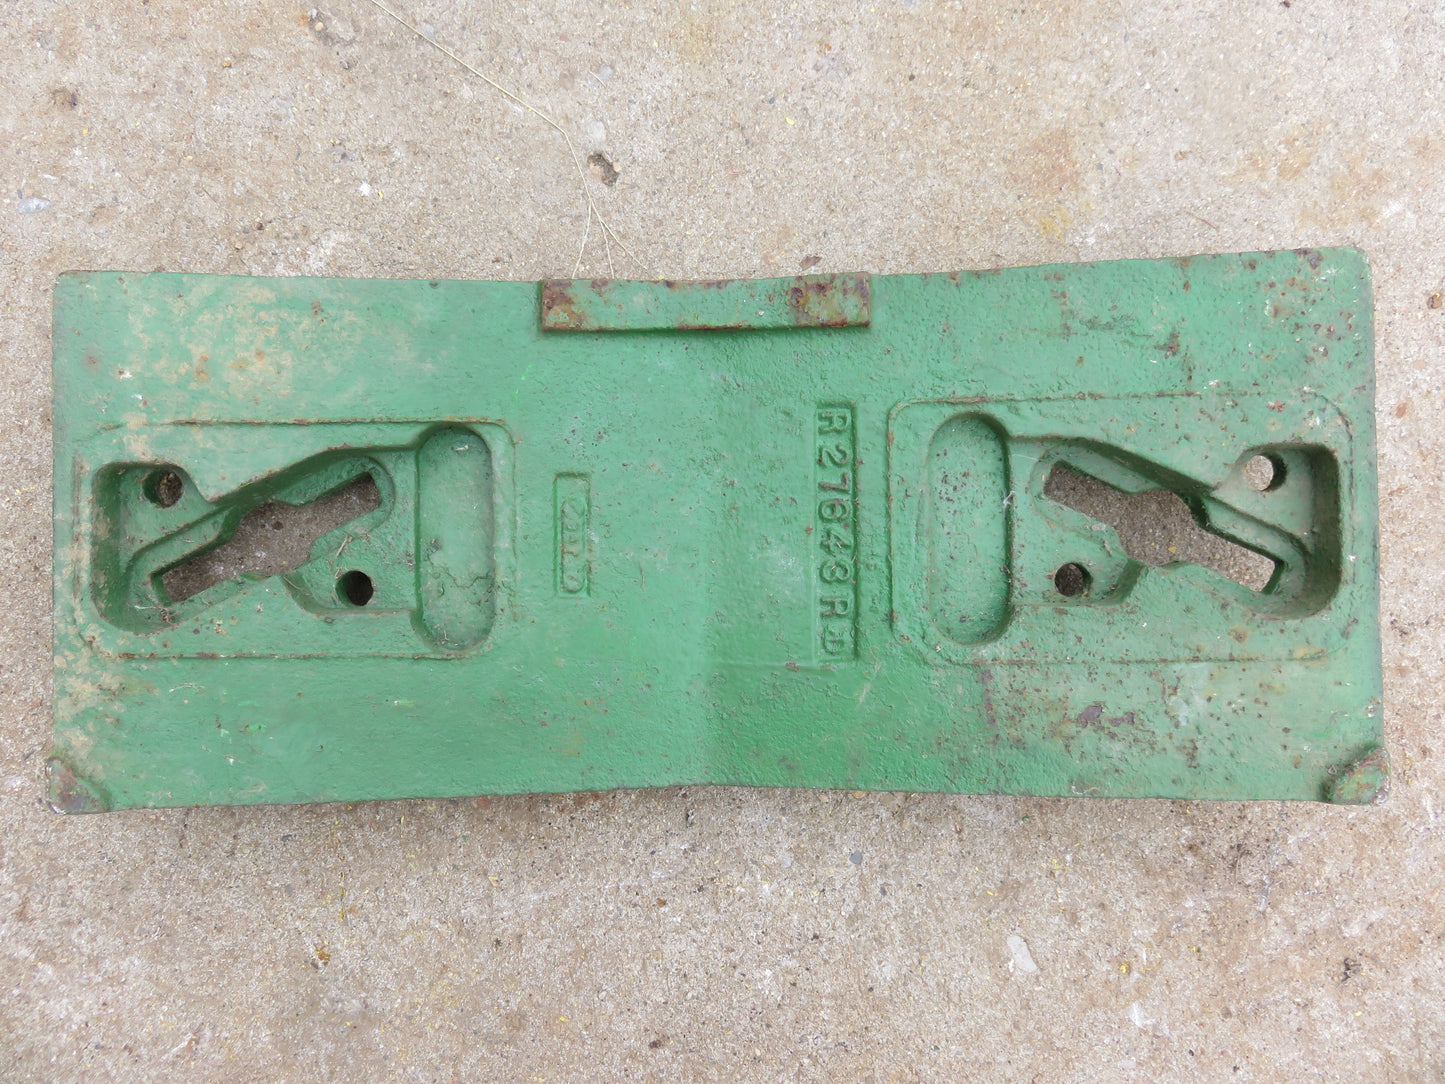 R27643 John Deere Front Weight For 820, 920, 1020, 1120, 1520, 2010, 2020, 2030, 2120